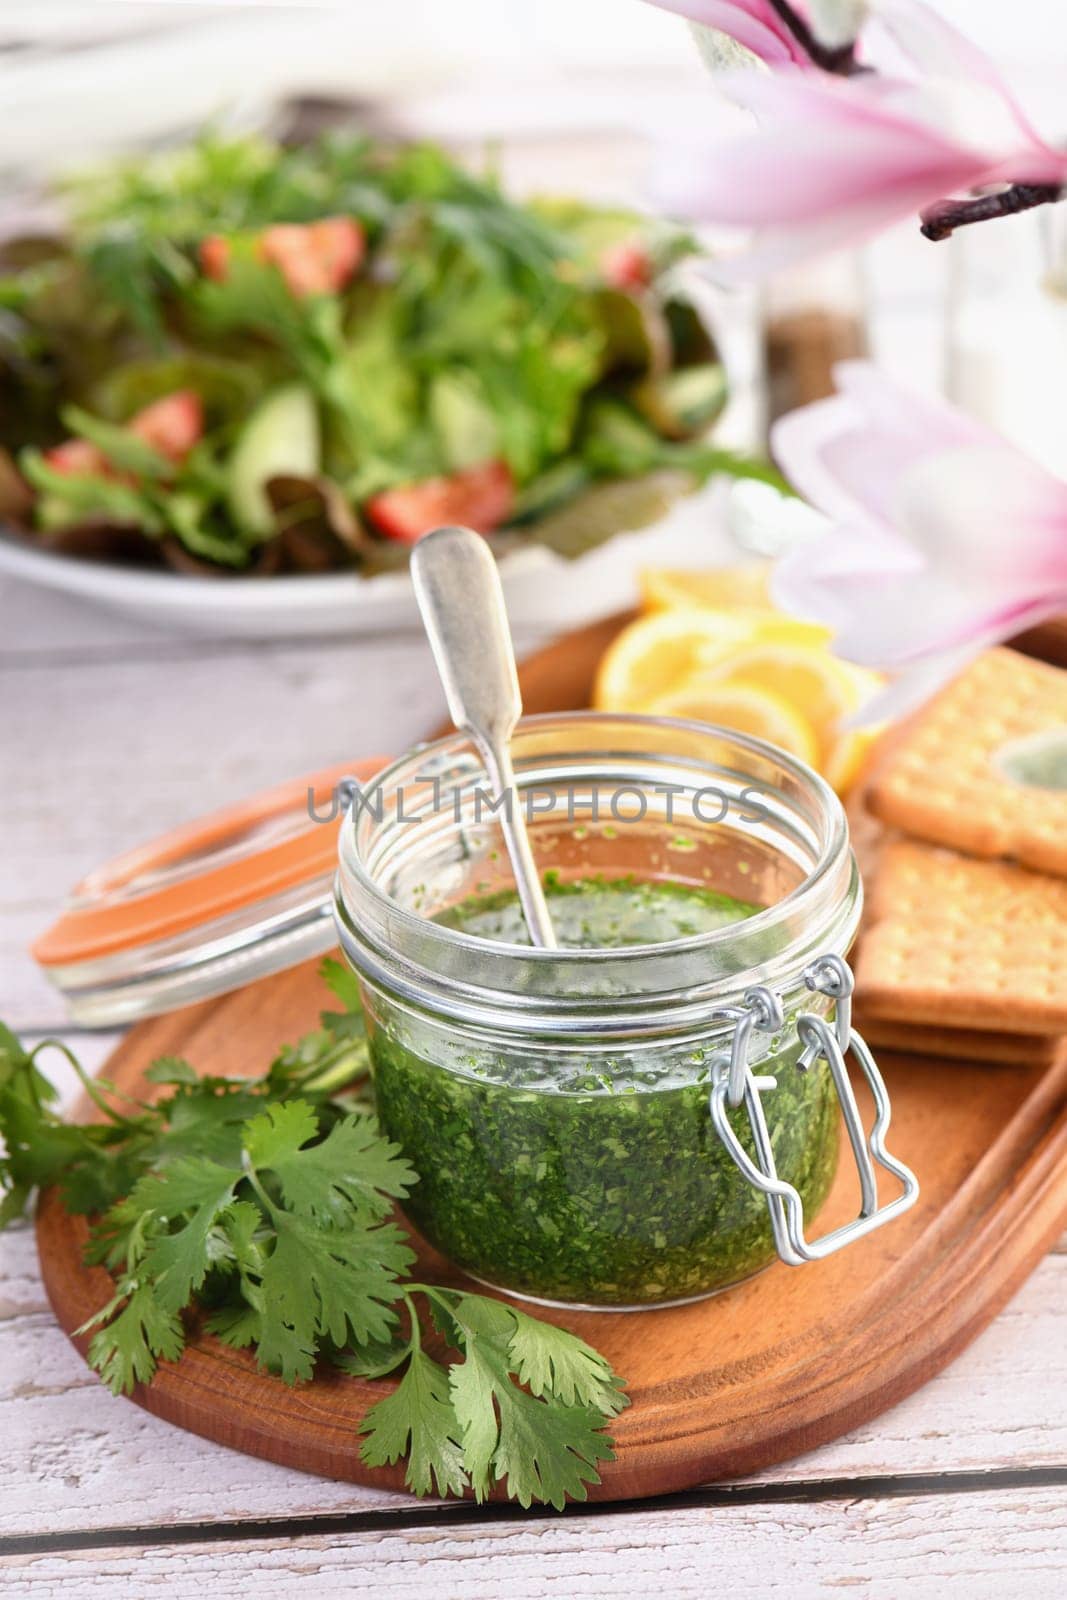 Green tasty herb sauce marinade from cilantro, parsley, oil, traditional seasoning for salad dressing